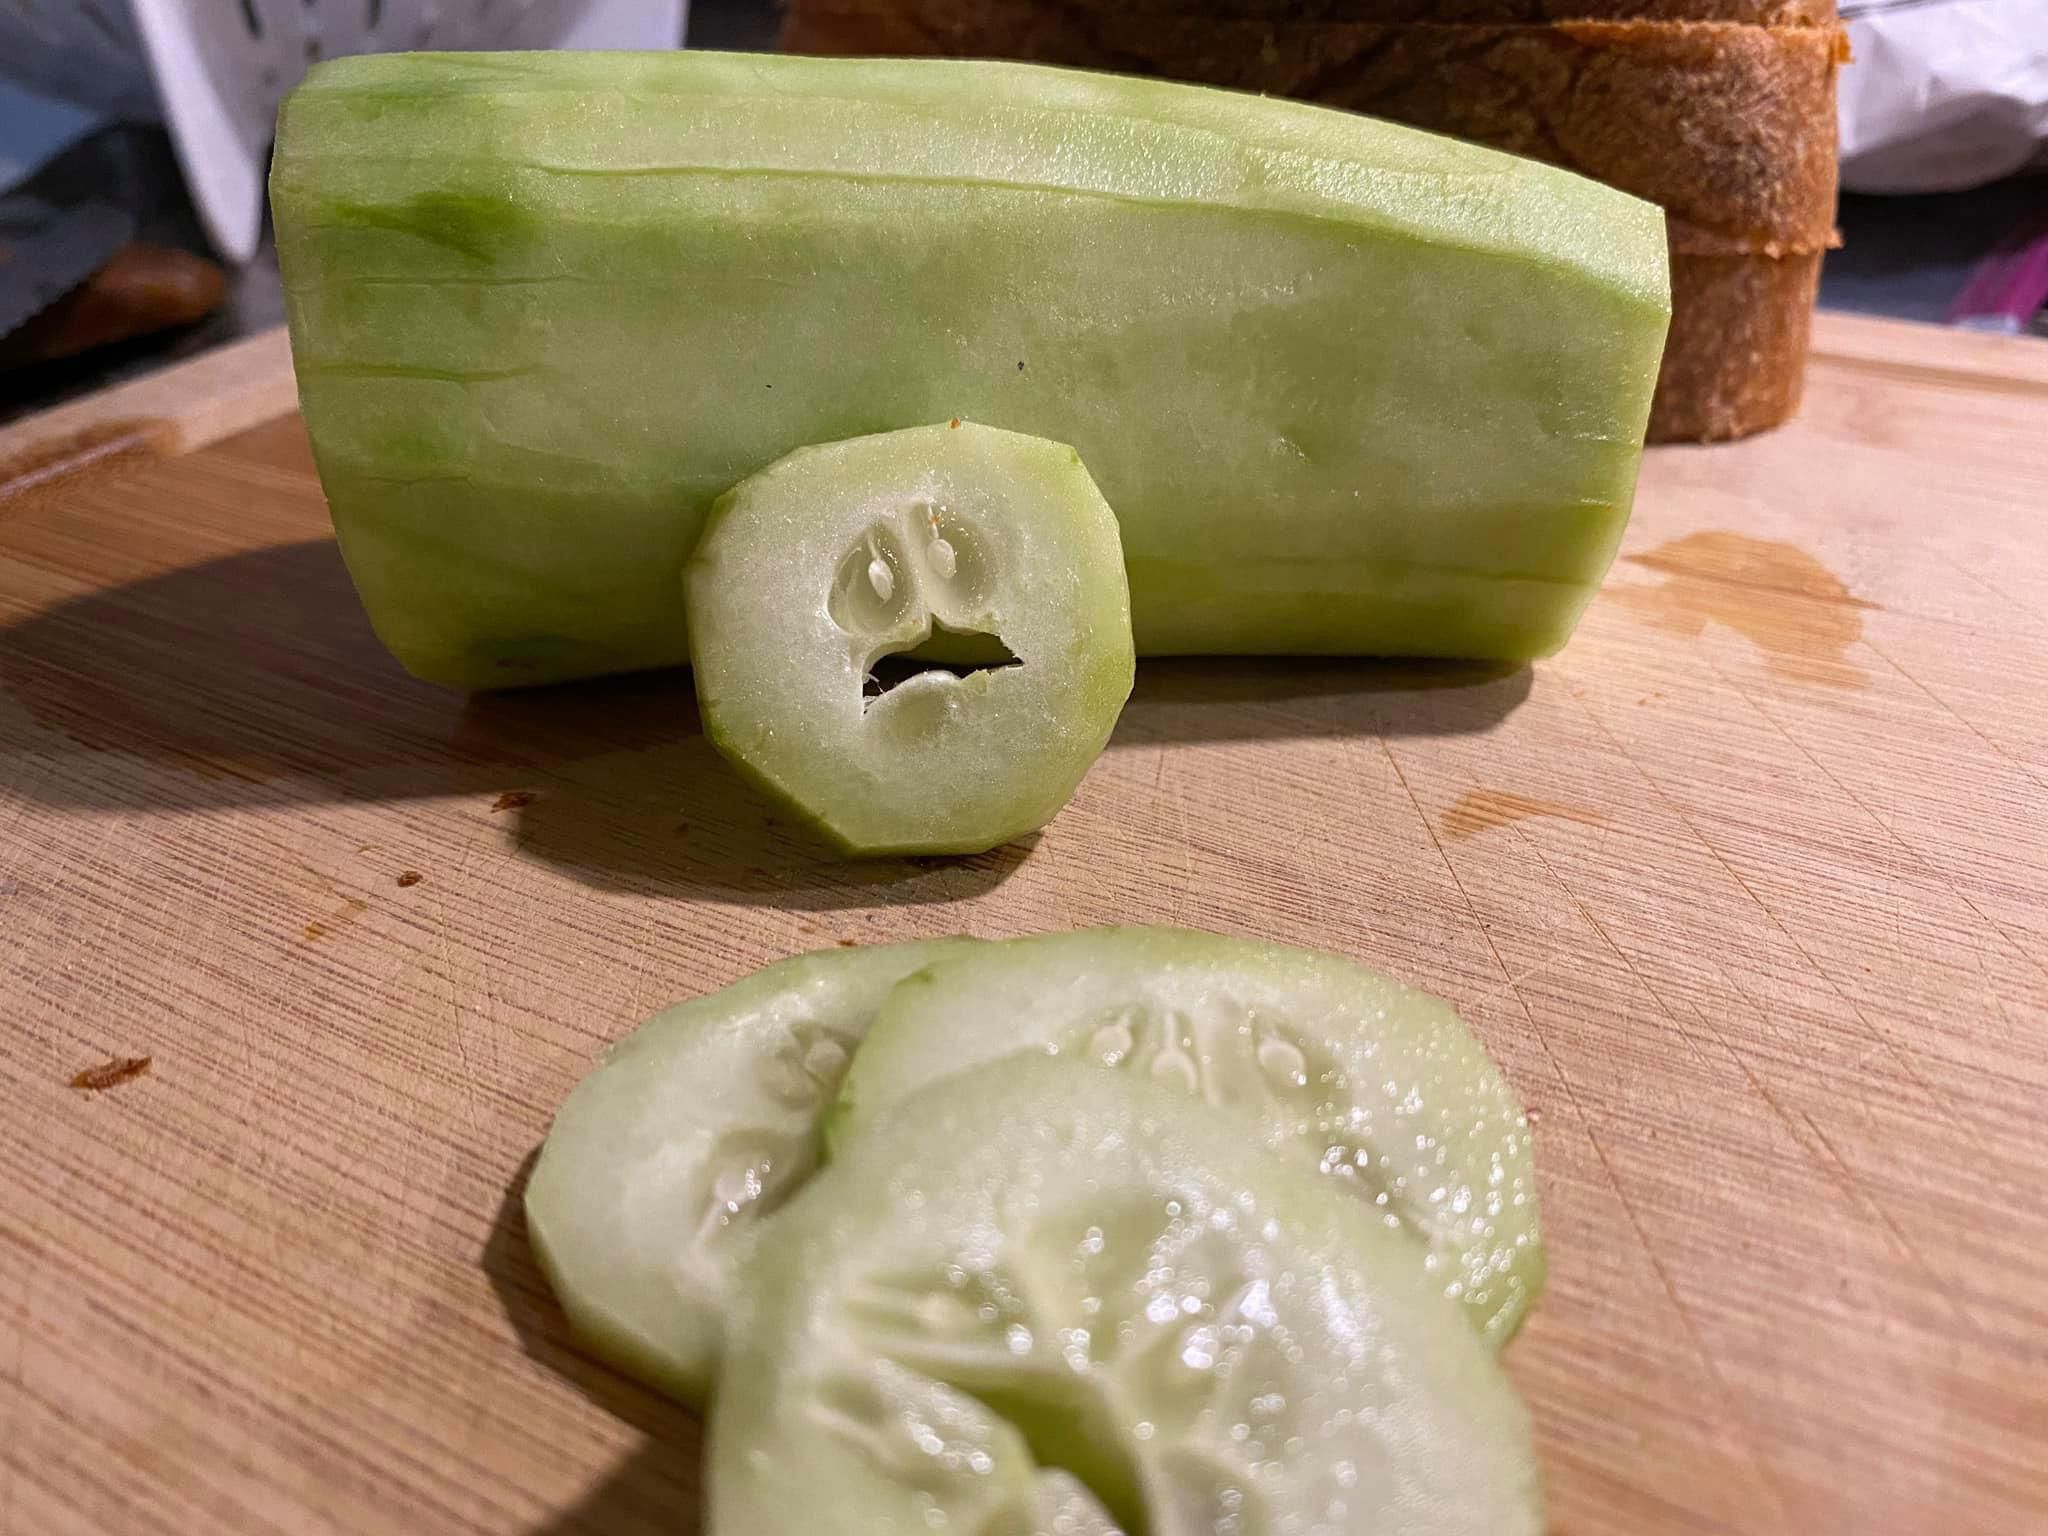 I cut up a cucumber and let me tell you I felt pretty bad about it.